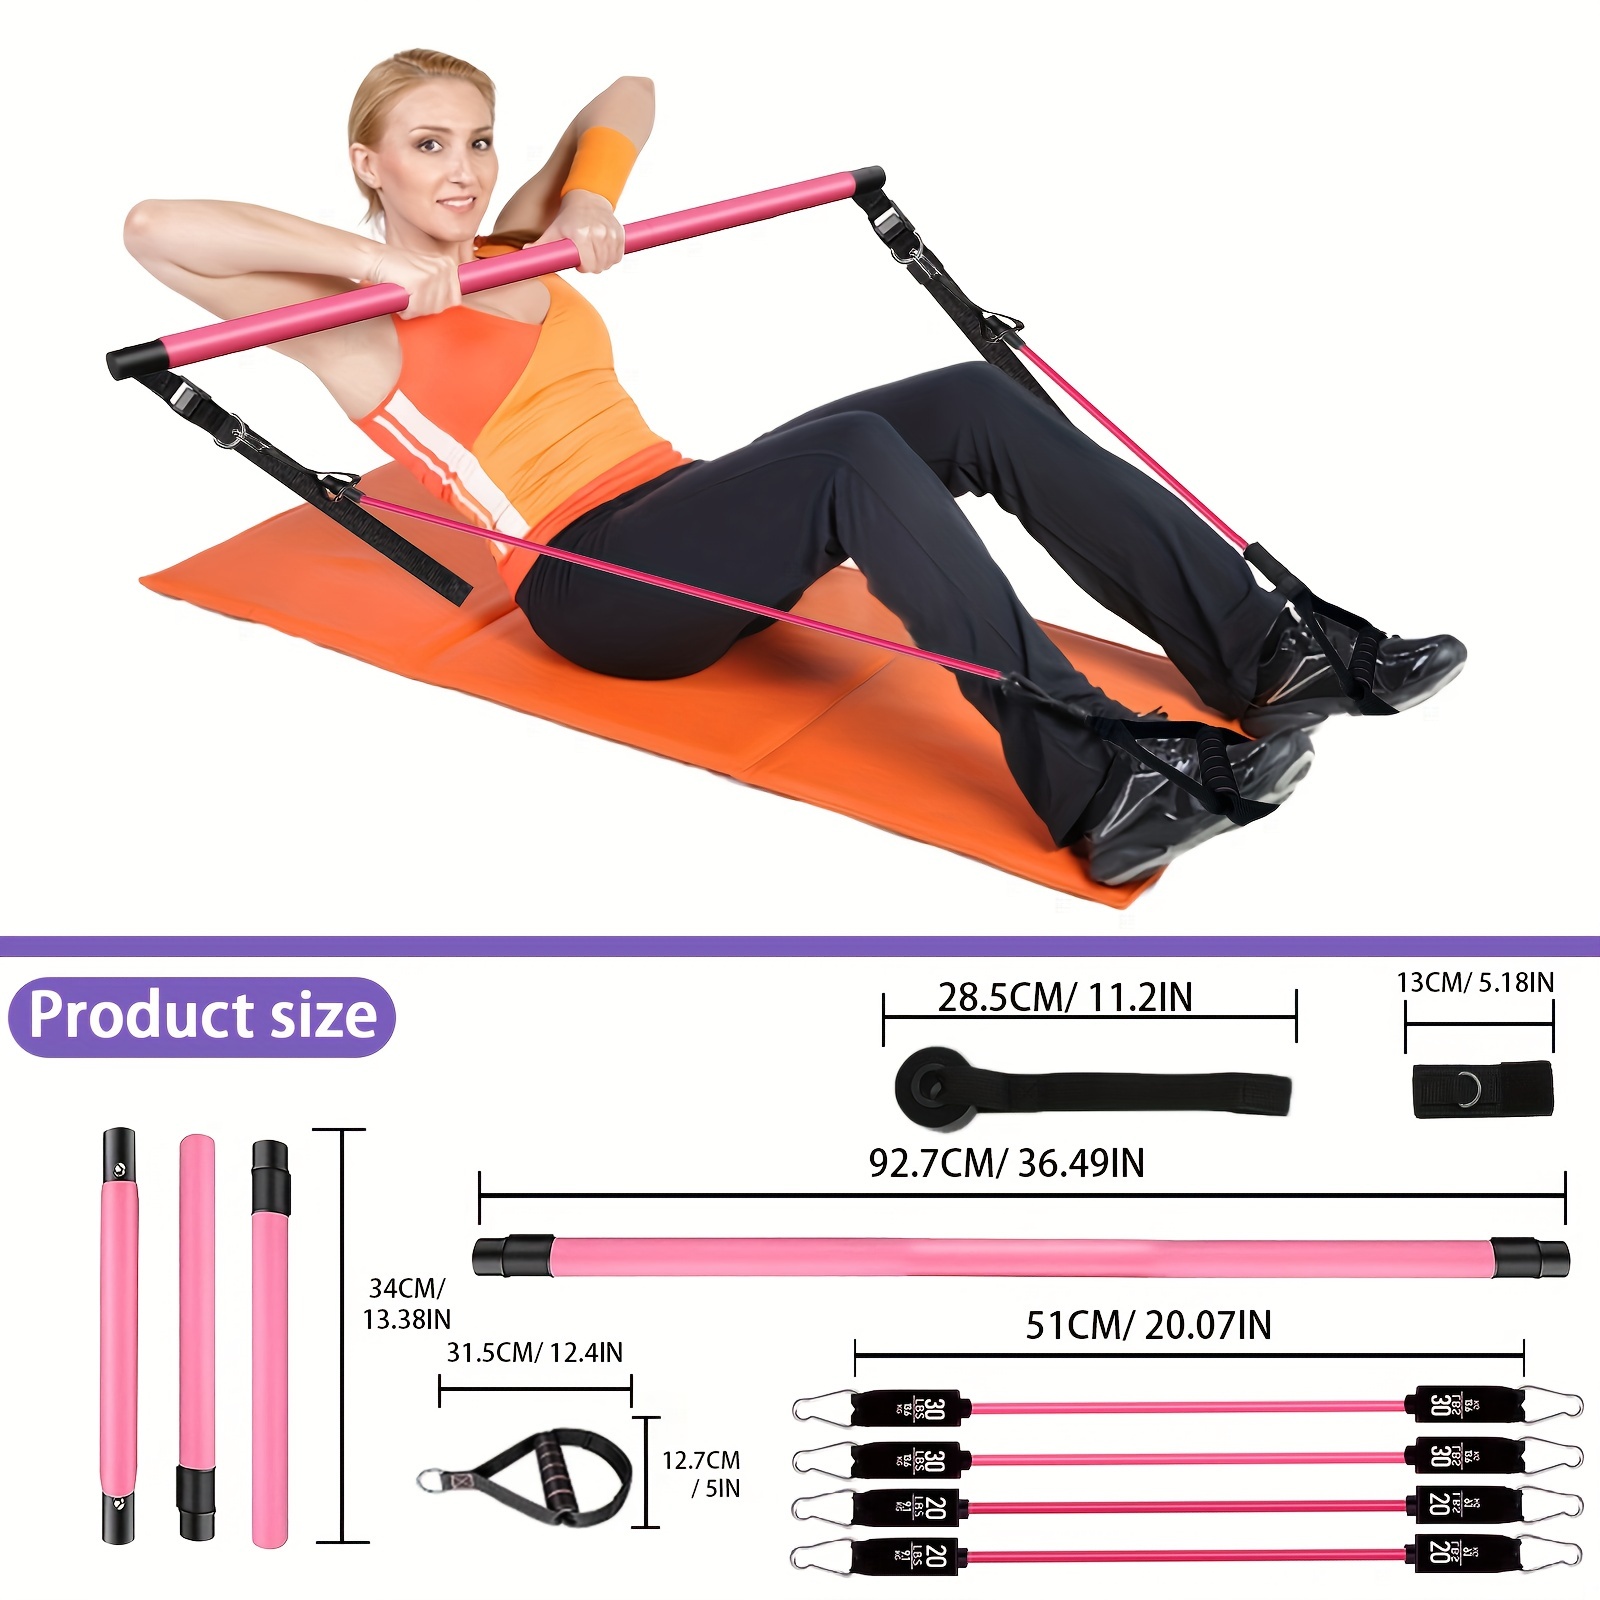  Pilates Bar Kit with Resistance Bands